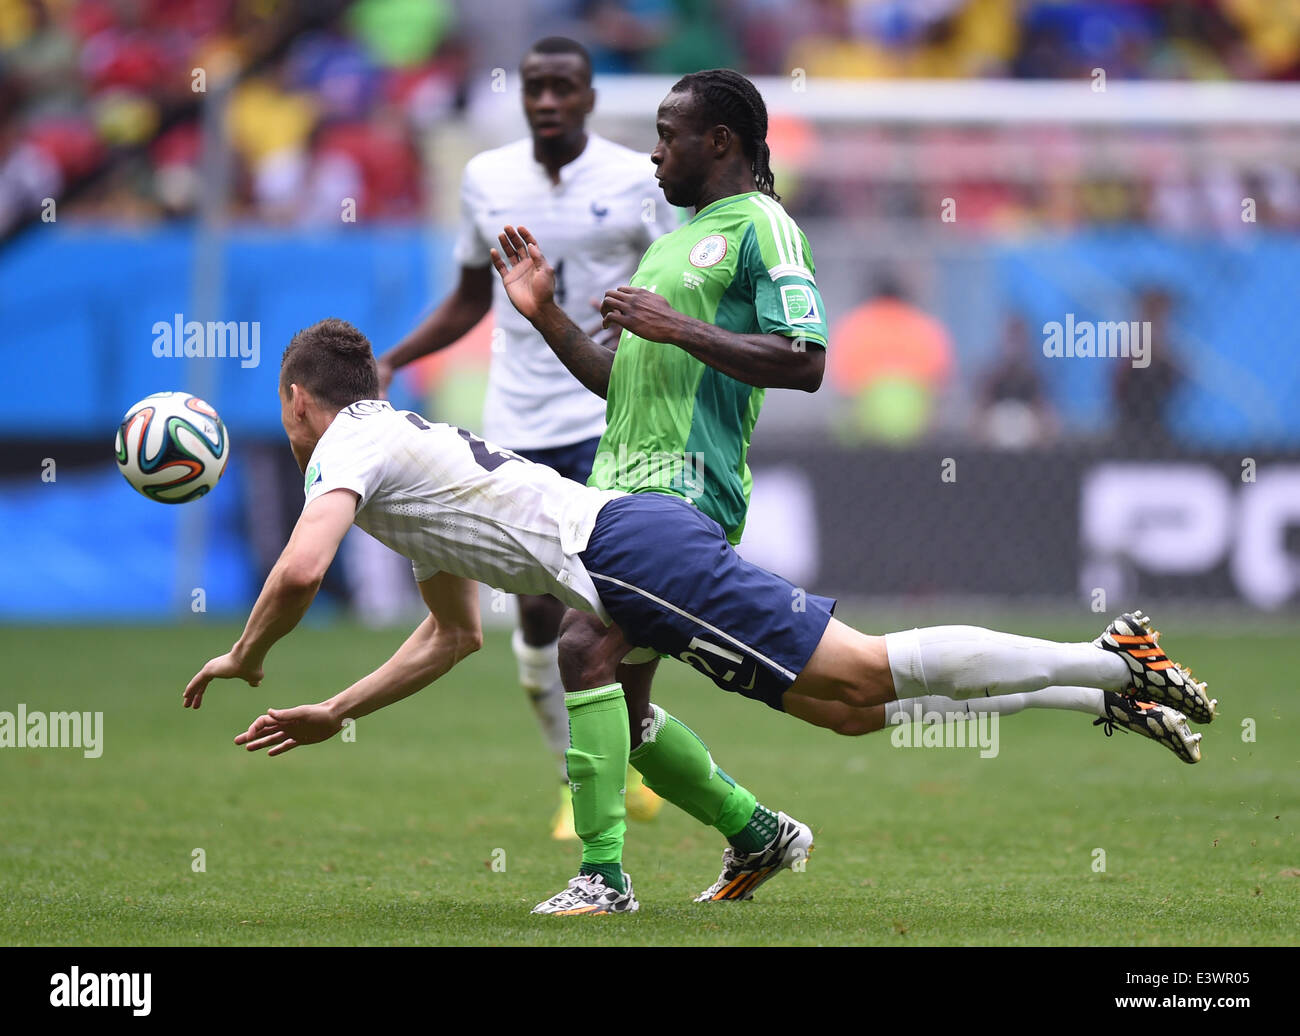 Brasilia, Brazil. 30th June, 2014. Laurent Koscielny (L) of France in action against Victor Moses of Nigeria during the FIFA World Cup 2014 round of 16 match between France and Nigeria at the Estadio National Stadium in Brasilia, Brazil, on 30 June 2014. Credit:  dpa picture alliance/Alamy Live News Stock Photo